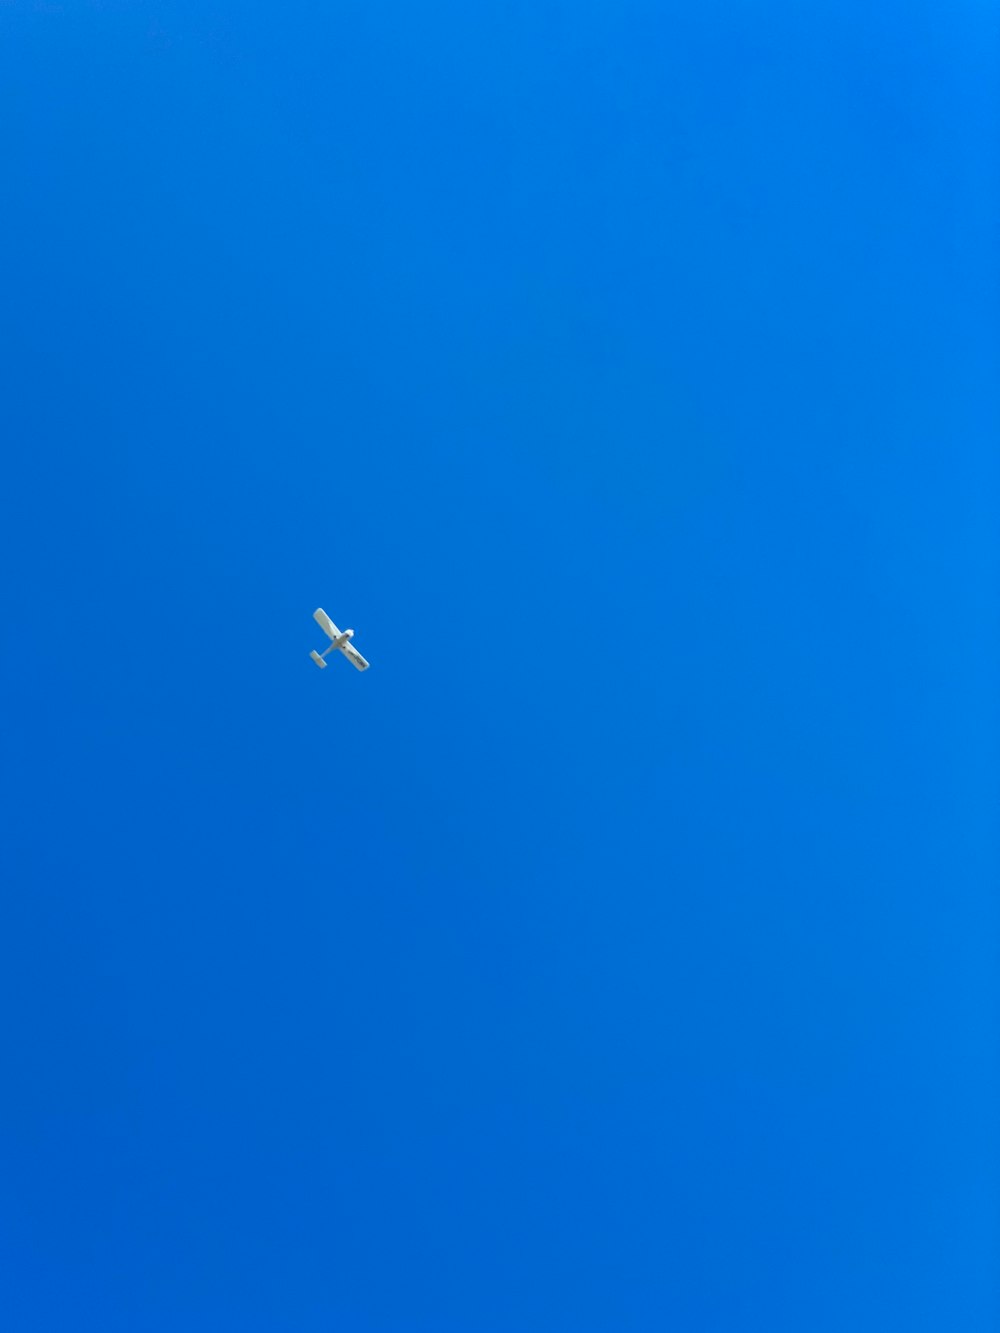 an airplane is flying high in the blue sky